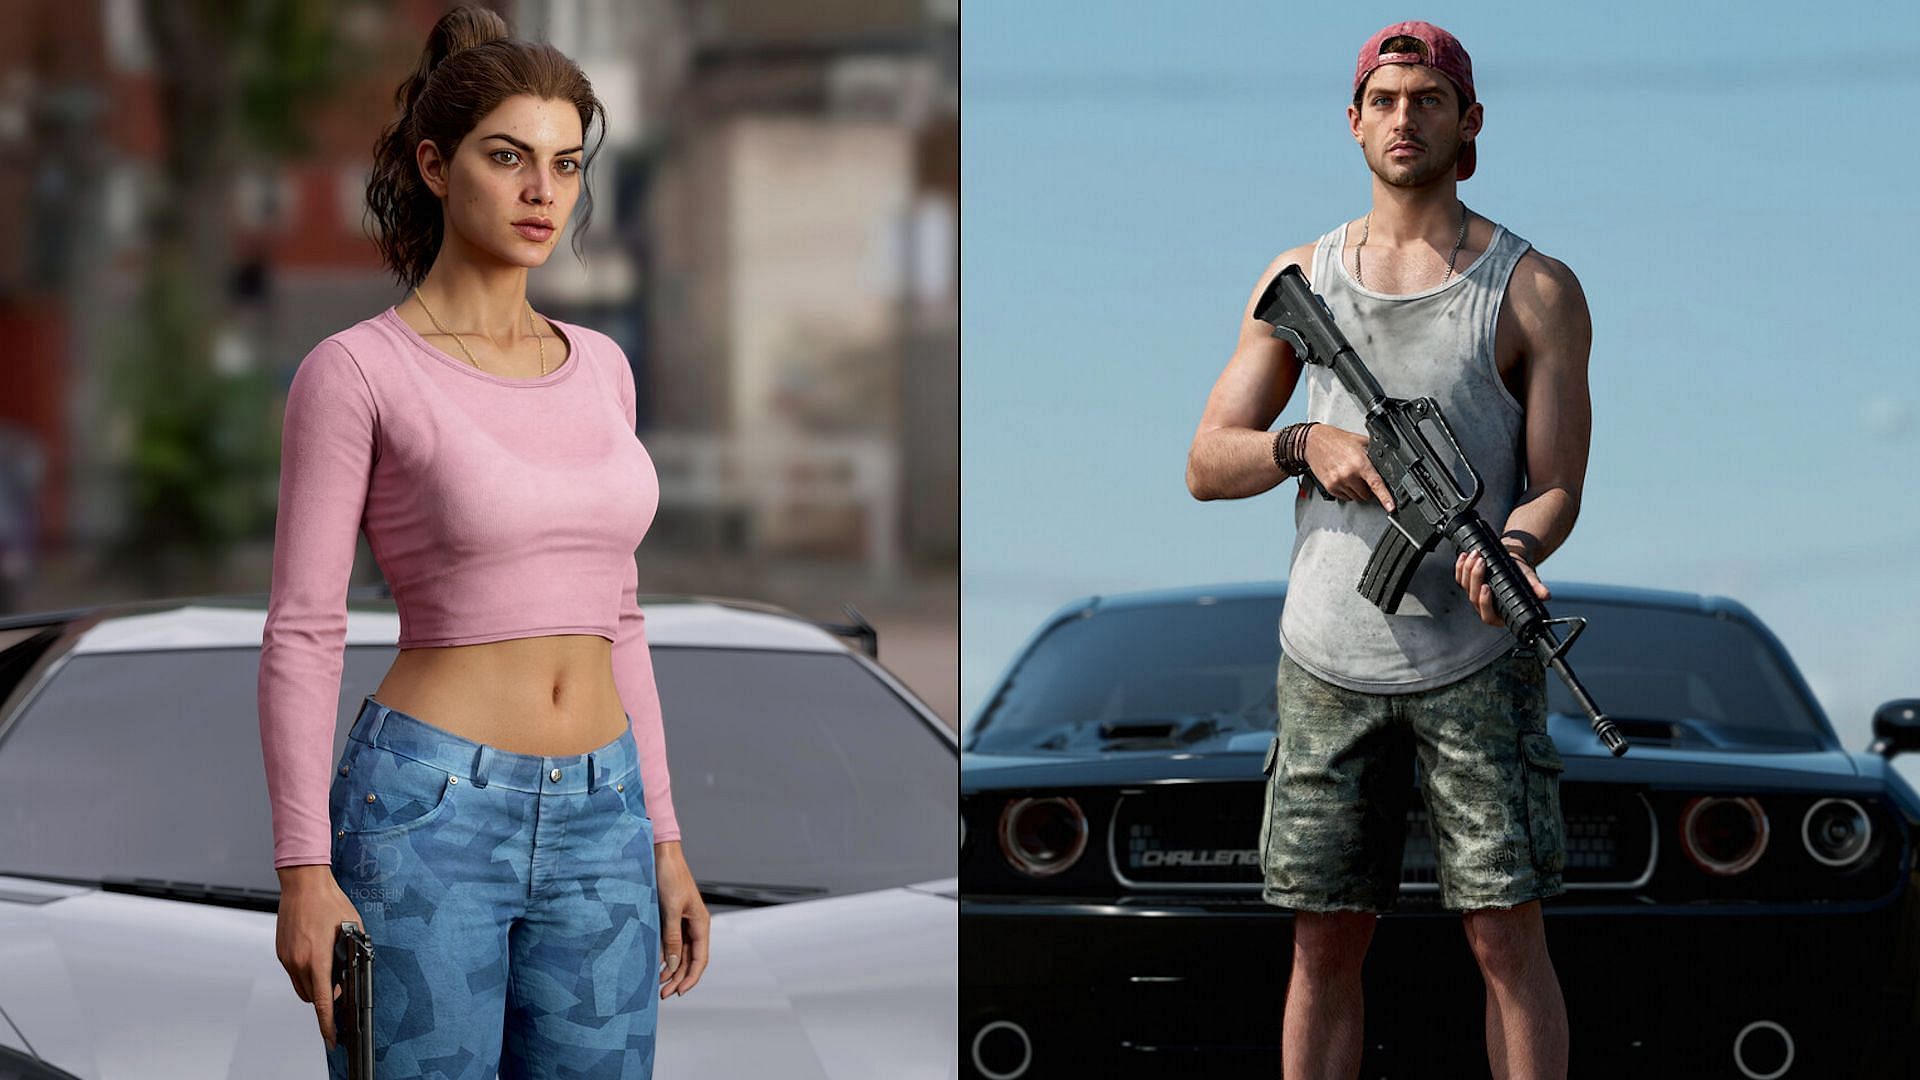 GTA 6 leaker discloses Lucia and Jason's personality issues in the game